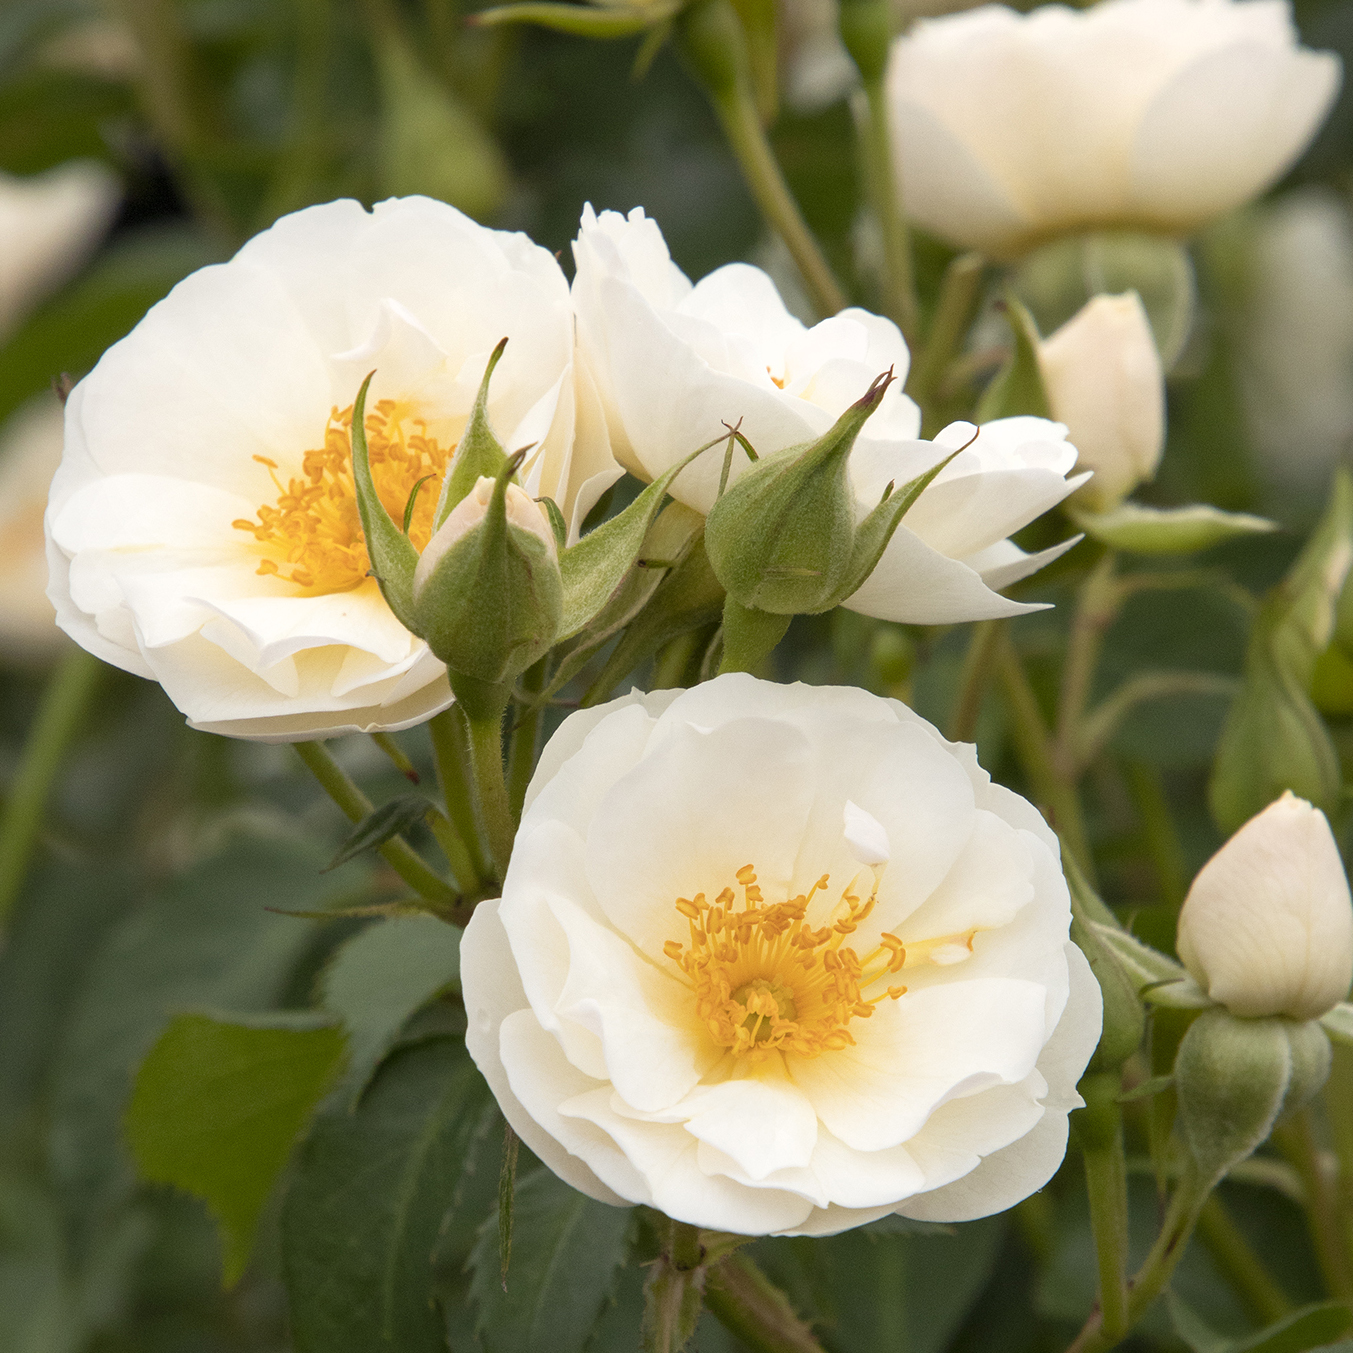 white groundcover rose flowers with yellow center and green leaves